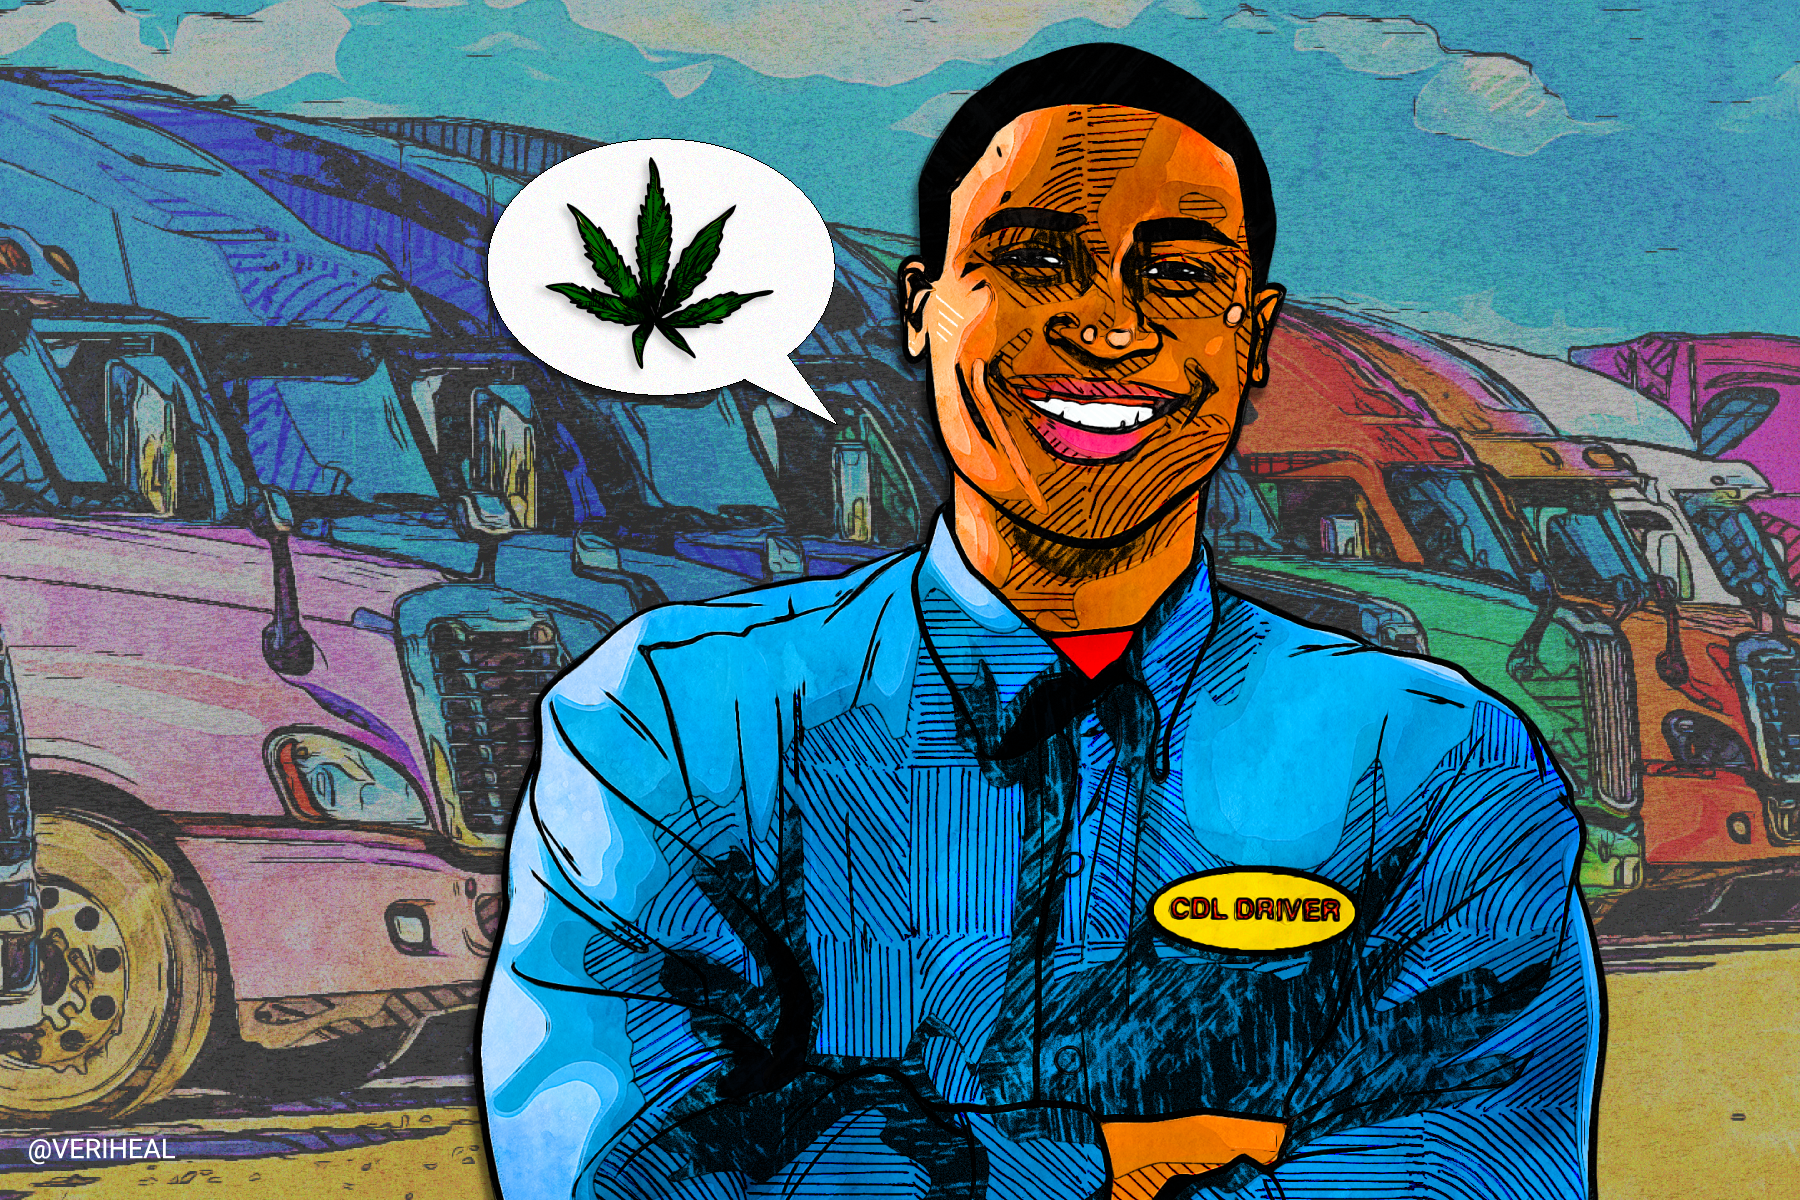 Commercial Drivers Are Embracing Cannabis Despite Risking Termination